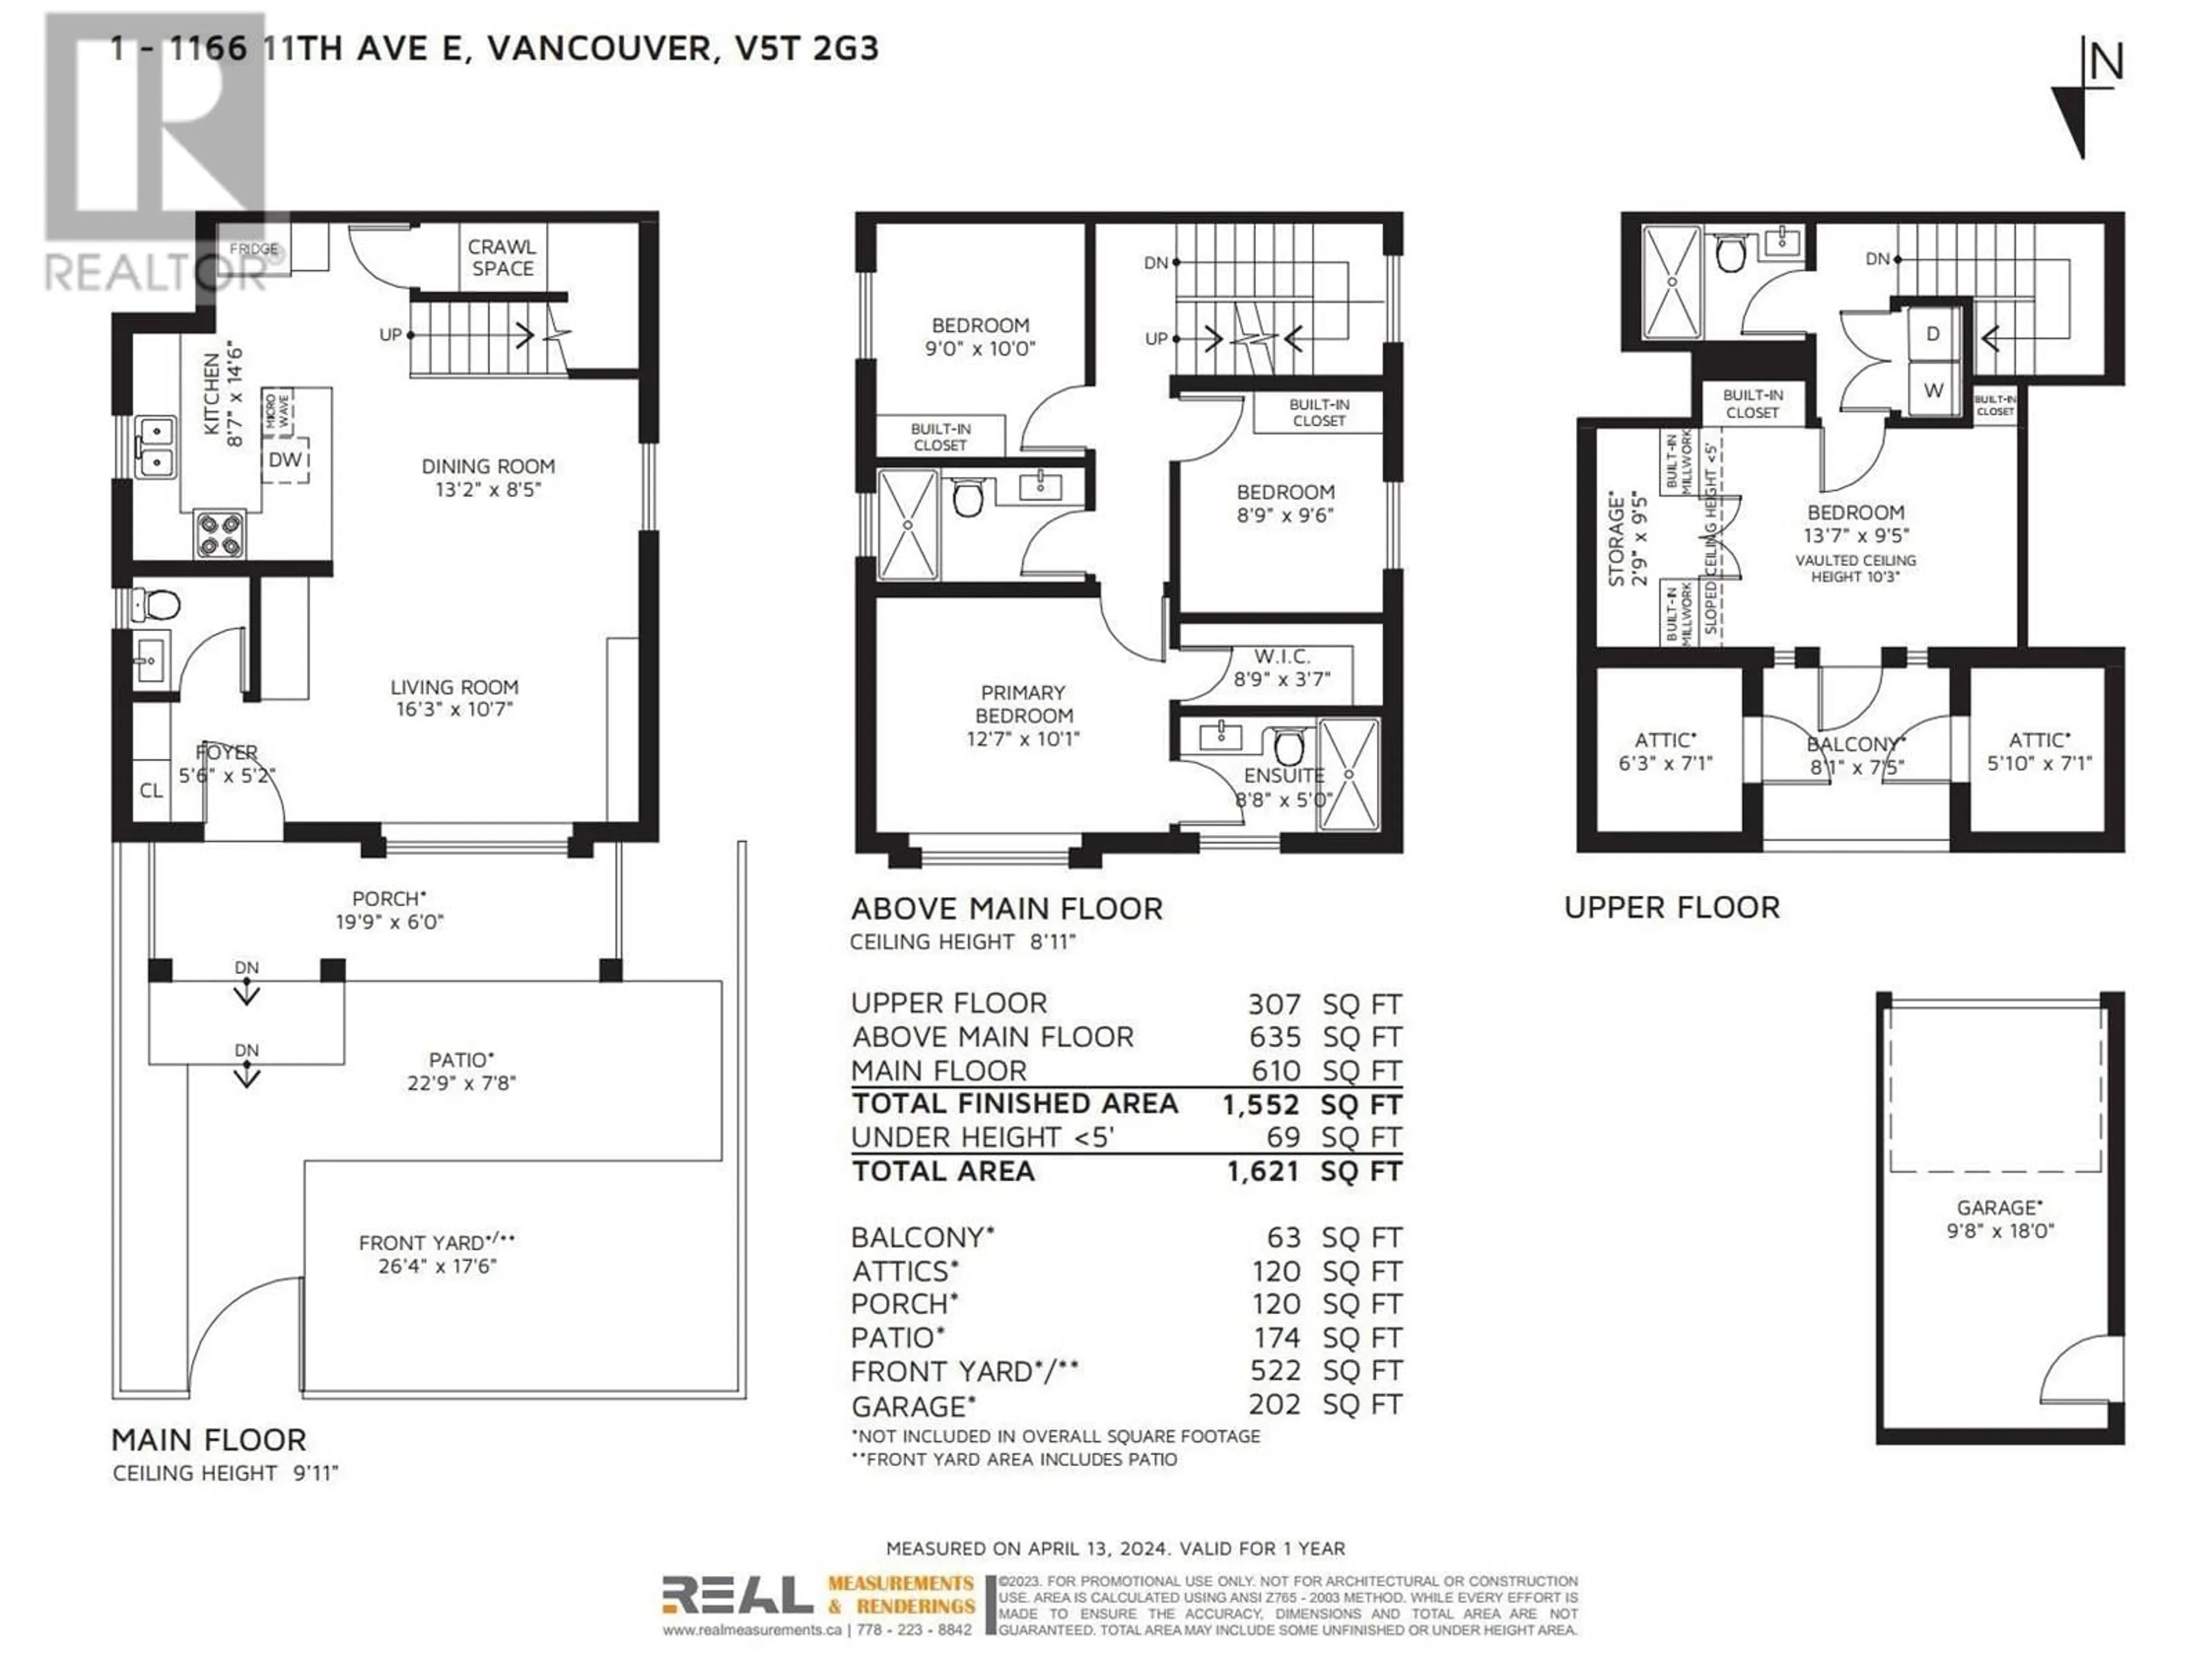 Floor plan for 1 1166 E 11TH AVENUE, Vancouver British Columbia V5T2G3